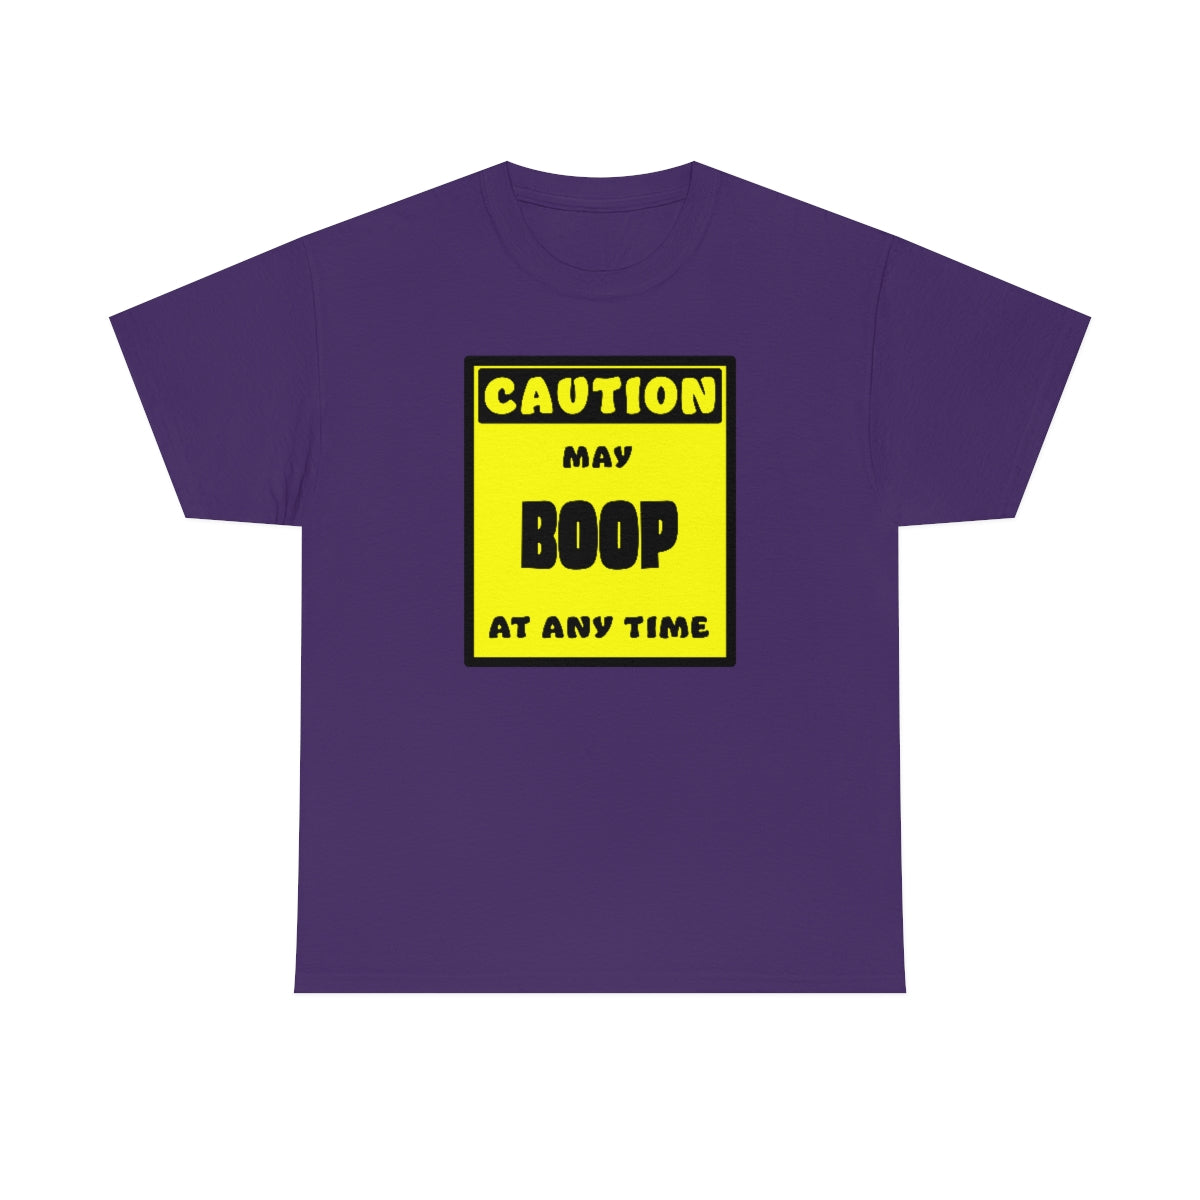 CAUTION! May BOOP at any time! - T-Shirt T-Shirt AFLT-Whootorca Purple S 